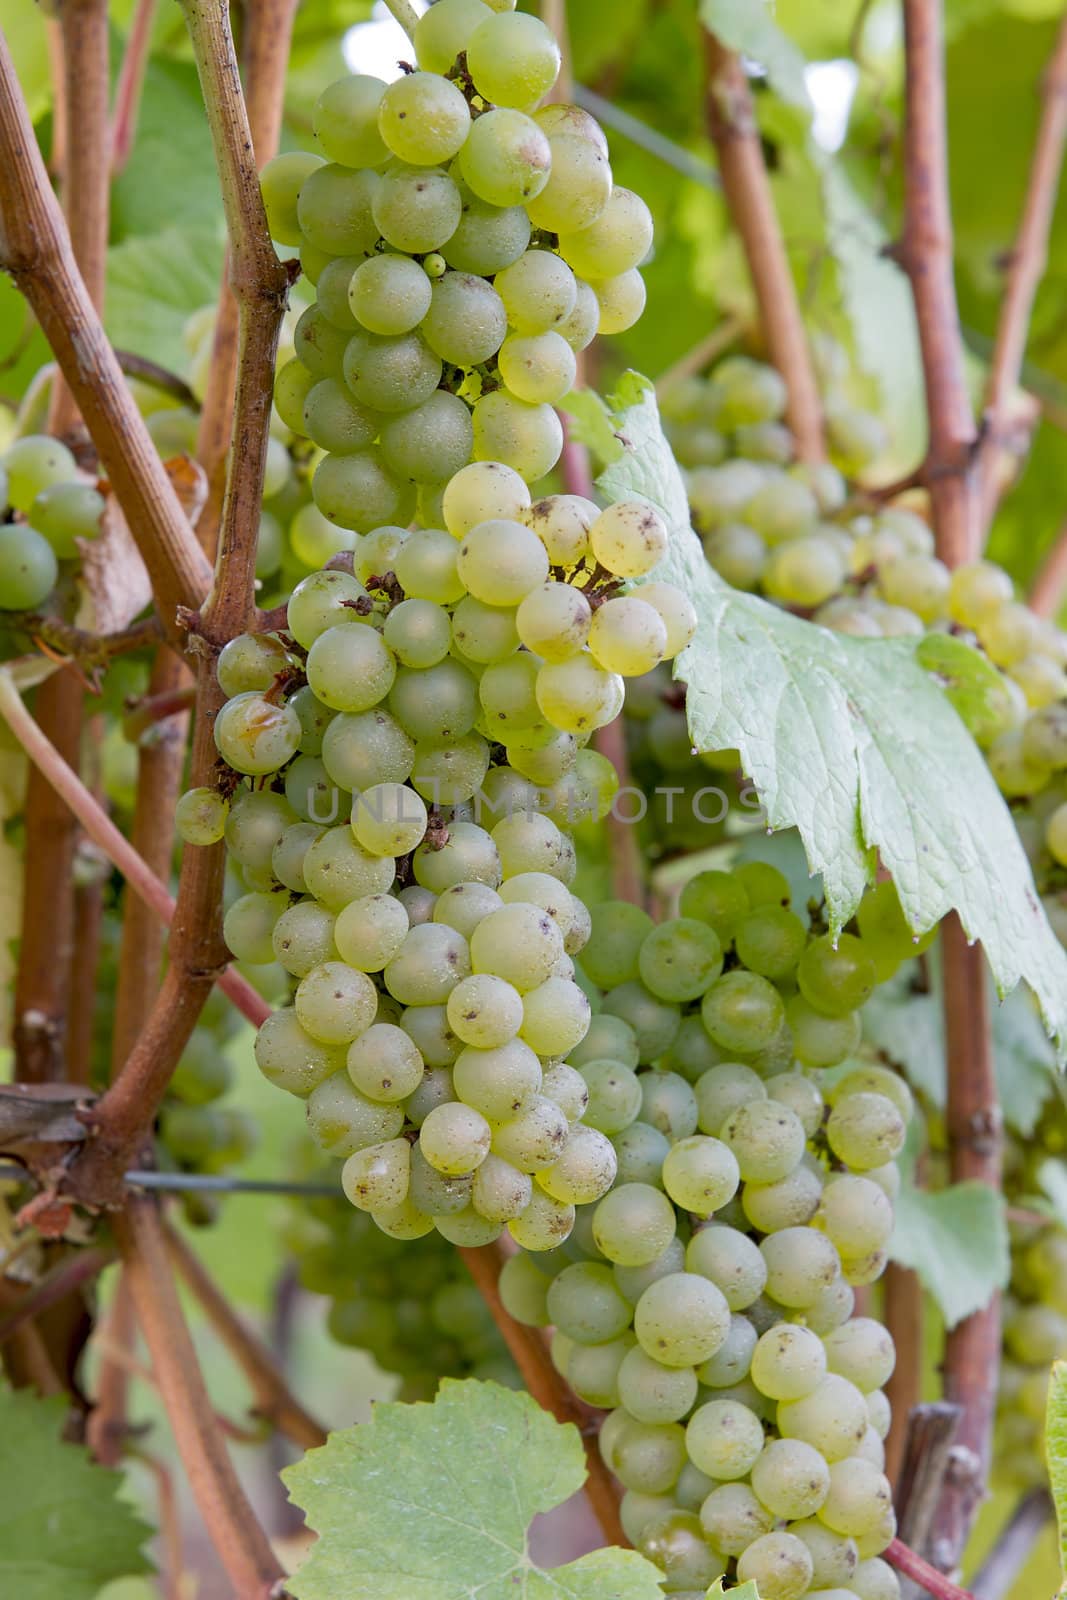 Bunches of White Wine Grapes Growing in Vineyard